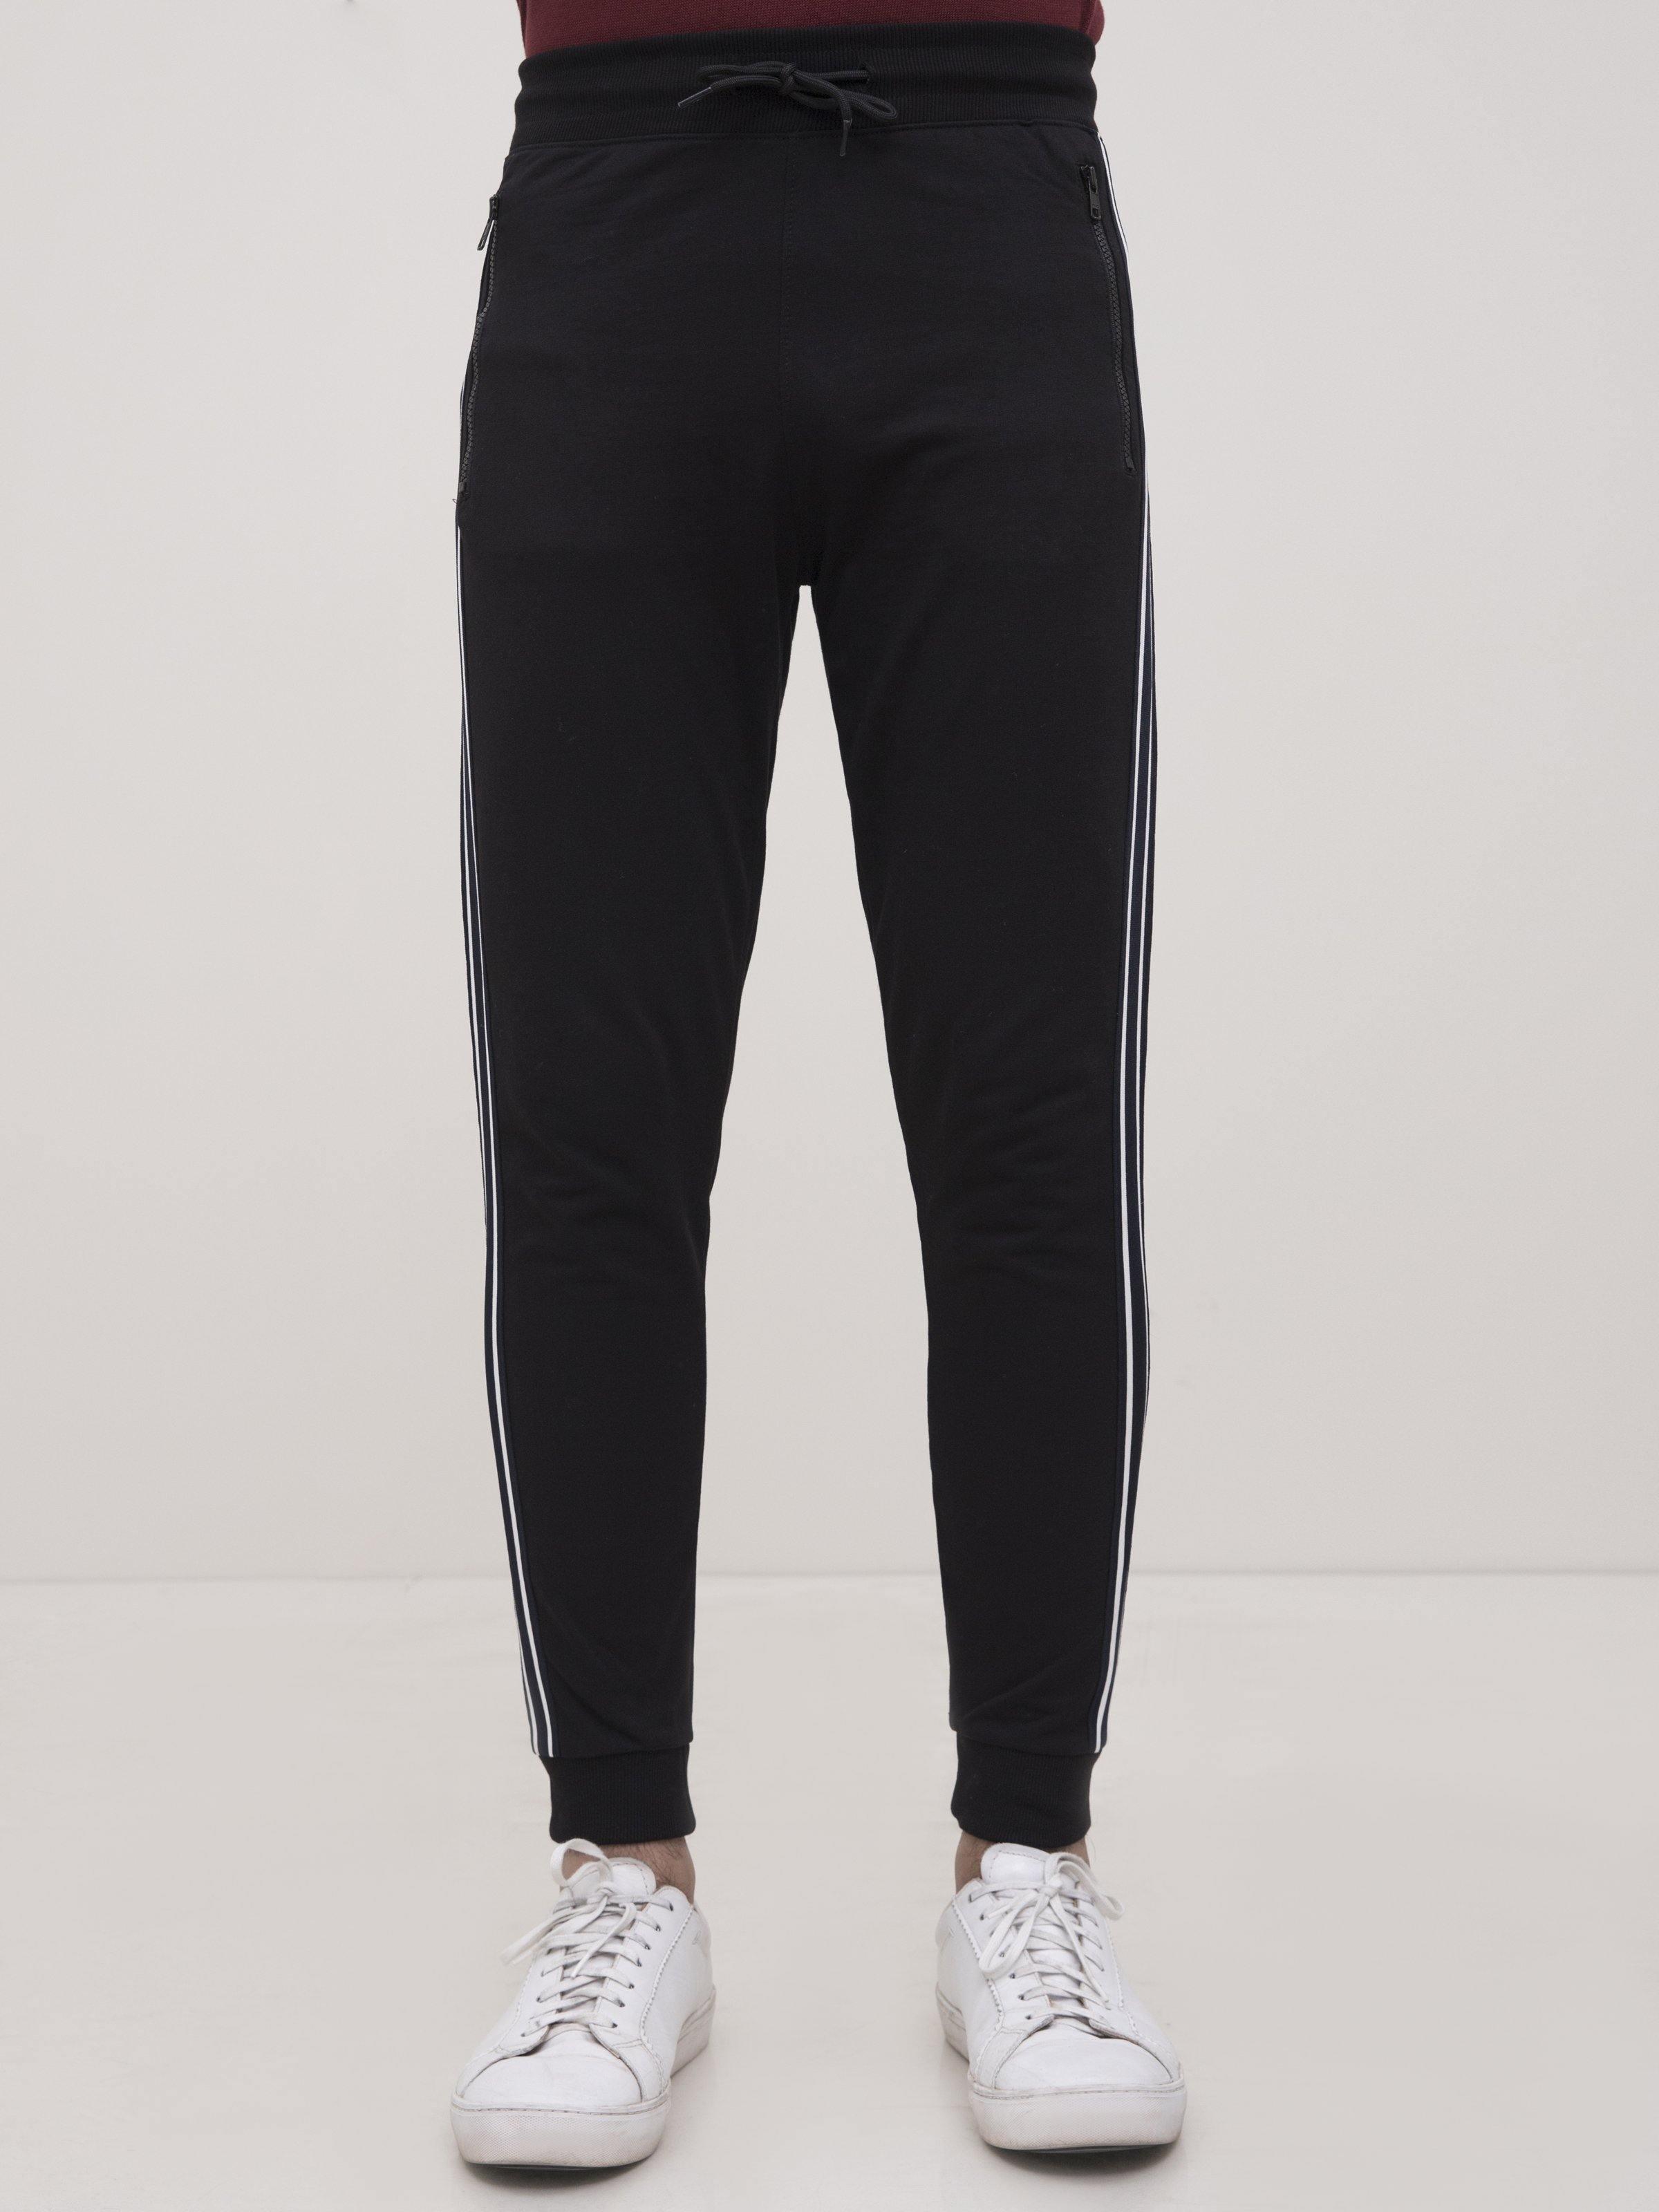 TERRY SIDE TAPE TROUSER BLACK at Charcoal Clothing